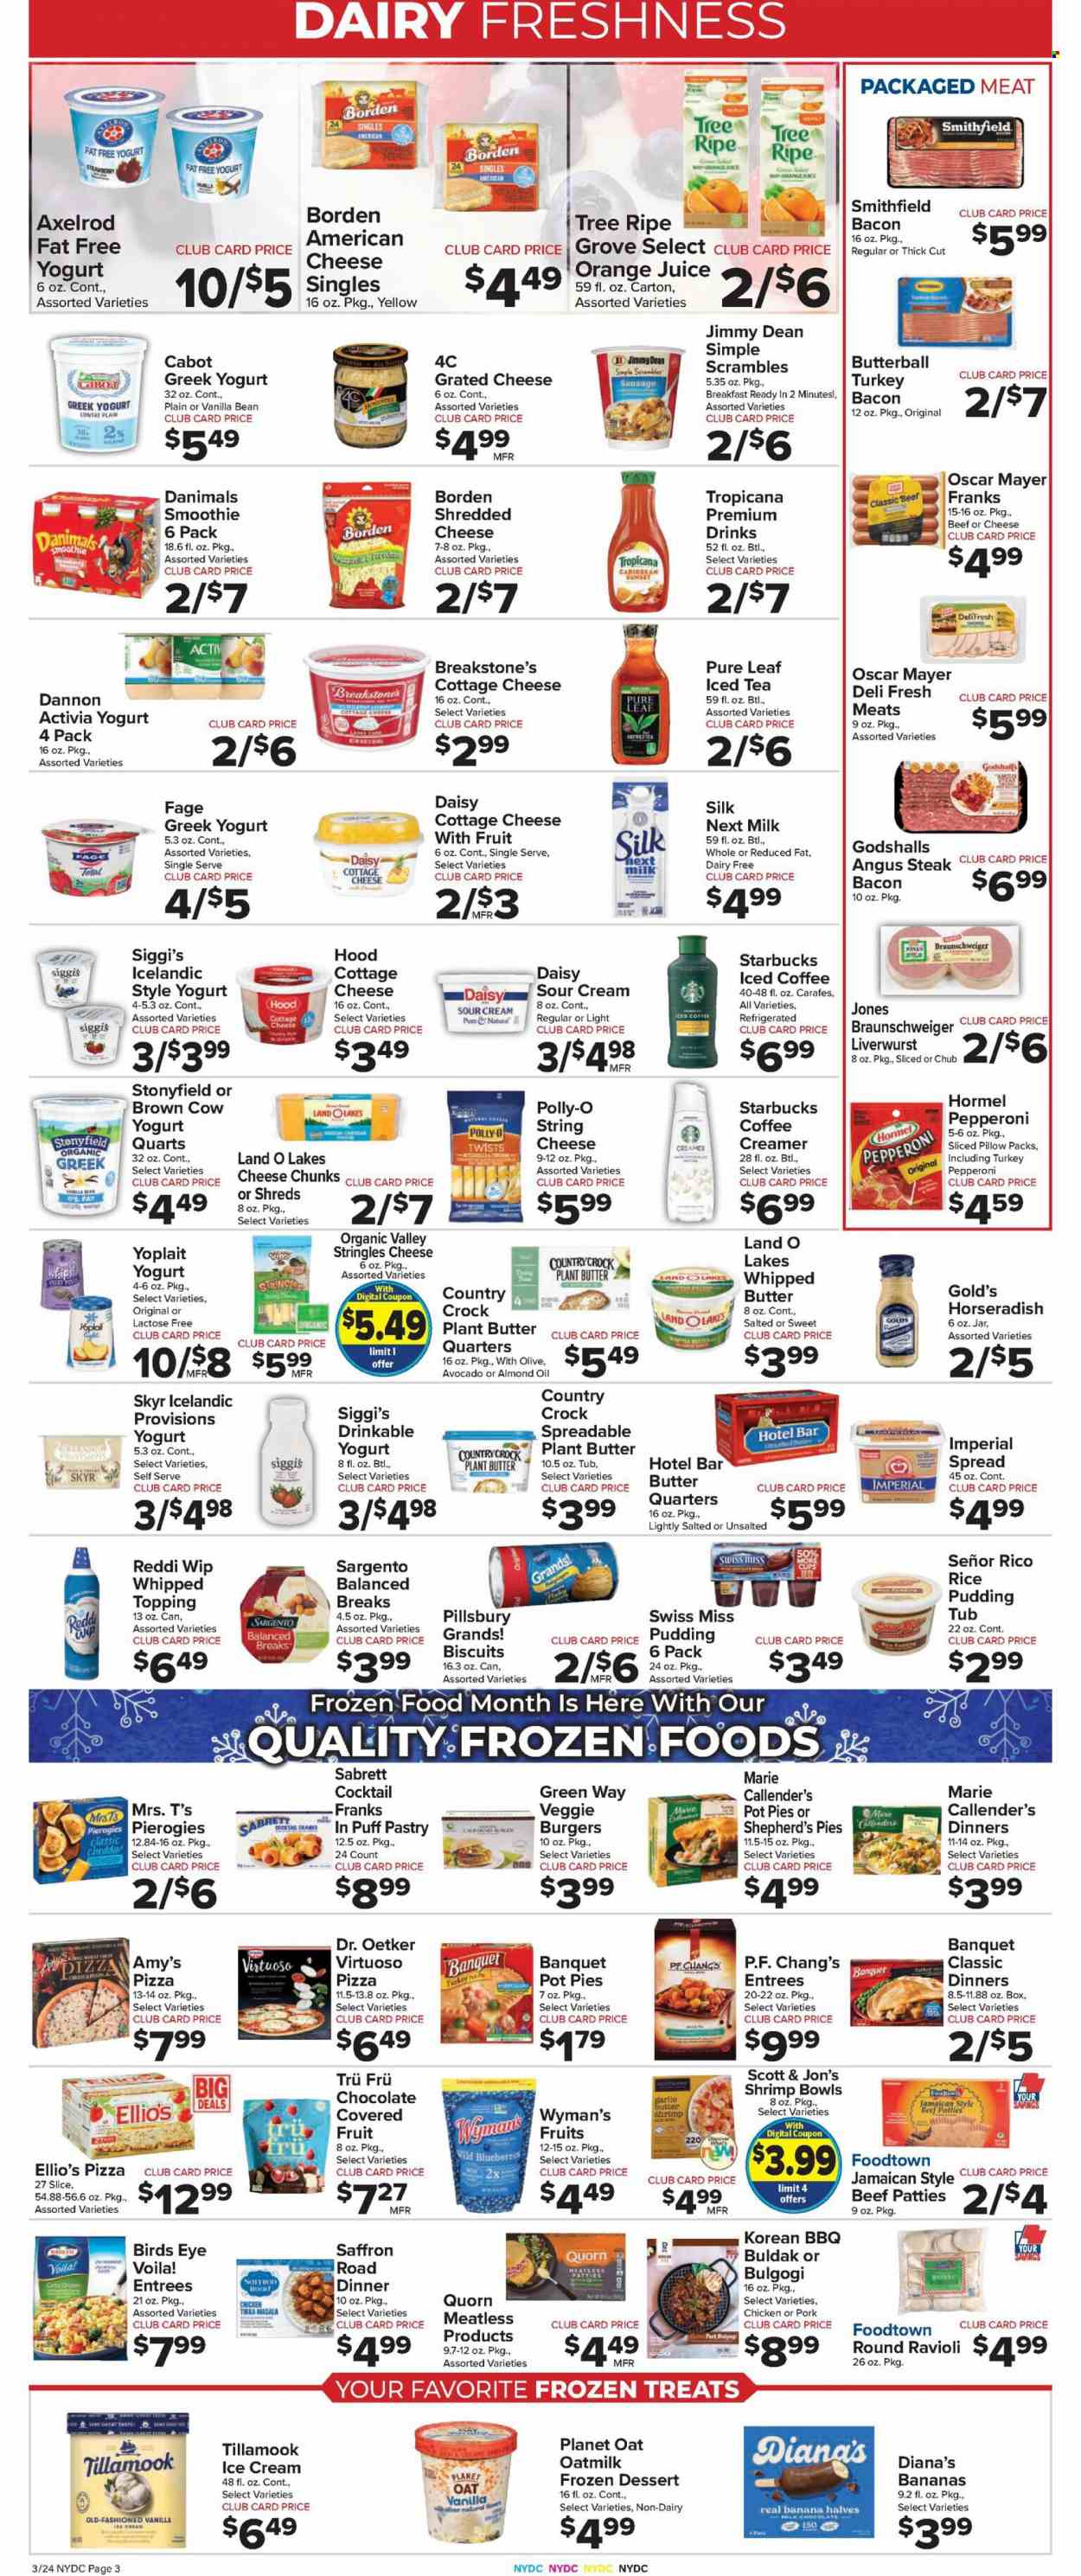 thumbnail - Foodtown Flyer - 03/24/2023 - 03/30/2023 - Sales products - pot pie, horseradish, avocado, blueberries, shrimps, ravioli, pizza, Pillsbury, Bird's Eye, veggie burger, Tikka Masala, Marie Callender's, Jimmy Dean, Hormel, bacon, Butterball, turkey bacon, Oscar Mayer, sausage, pepperoni, american cheese, cottage cheese, shredded cheese, string cheese, cheddar, Dr. Oetker, grated cheese, curd, Sargento, greek yoghurt, yoghurt, Activia, Yoplait, Dannon, Danimals, Swiss Miss, rice pudding, Silk, oat milk, whipped butter, sour cream, creamer, ice cream, milk chocolate, biscuit, topping, almond oil, orange juice, juice, ice tea, smoothie, iced coffee, Pure Leaf, Starbucks, chicken, steak, Crest. Page 5.